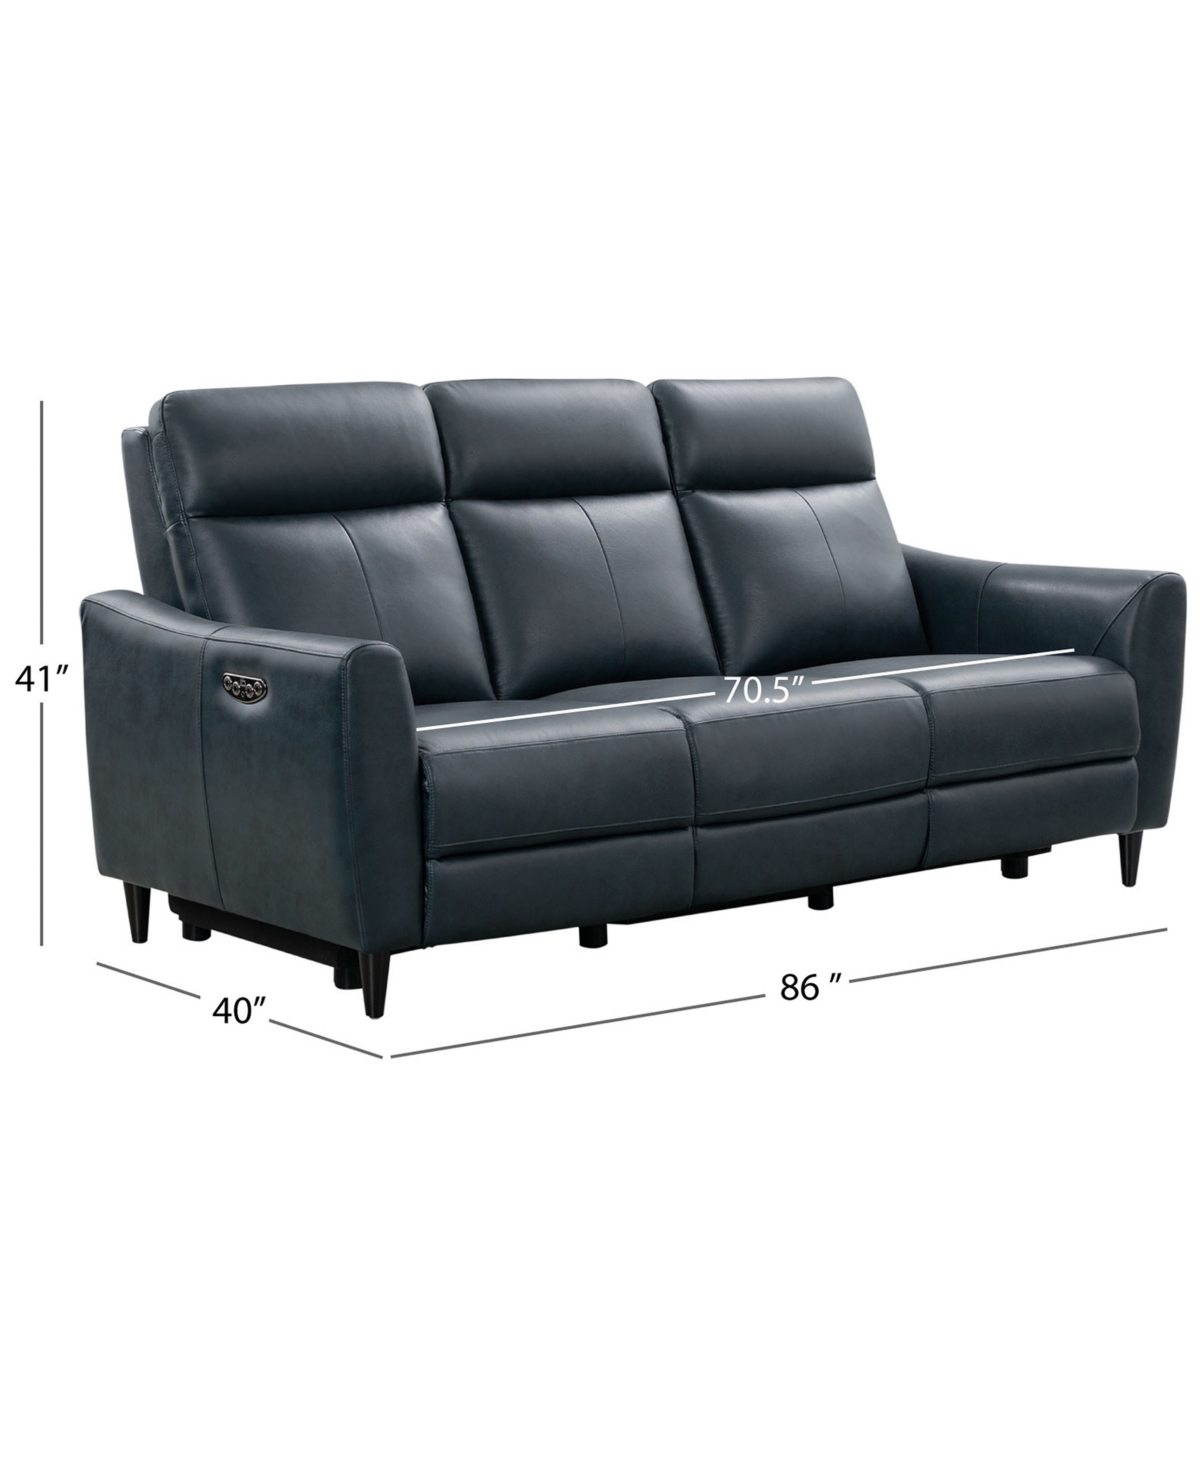 Shop Abbyson Living Tanya 86" Leather Power Reclining Sofa With Power Headrest In Dark Gray